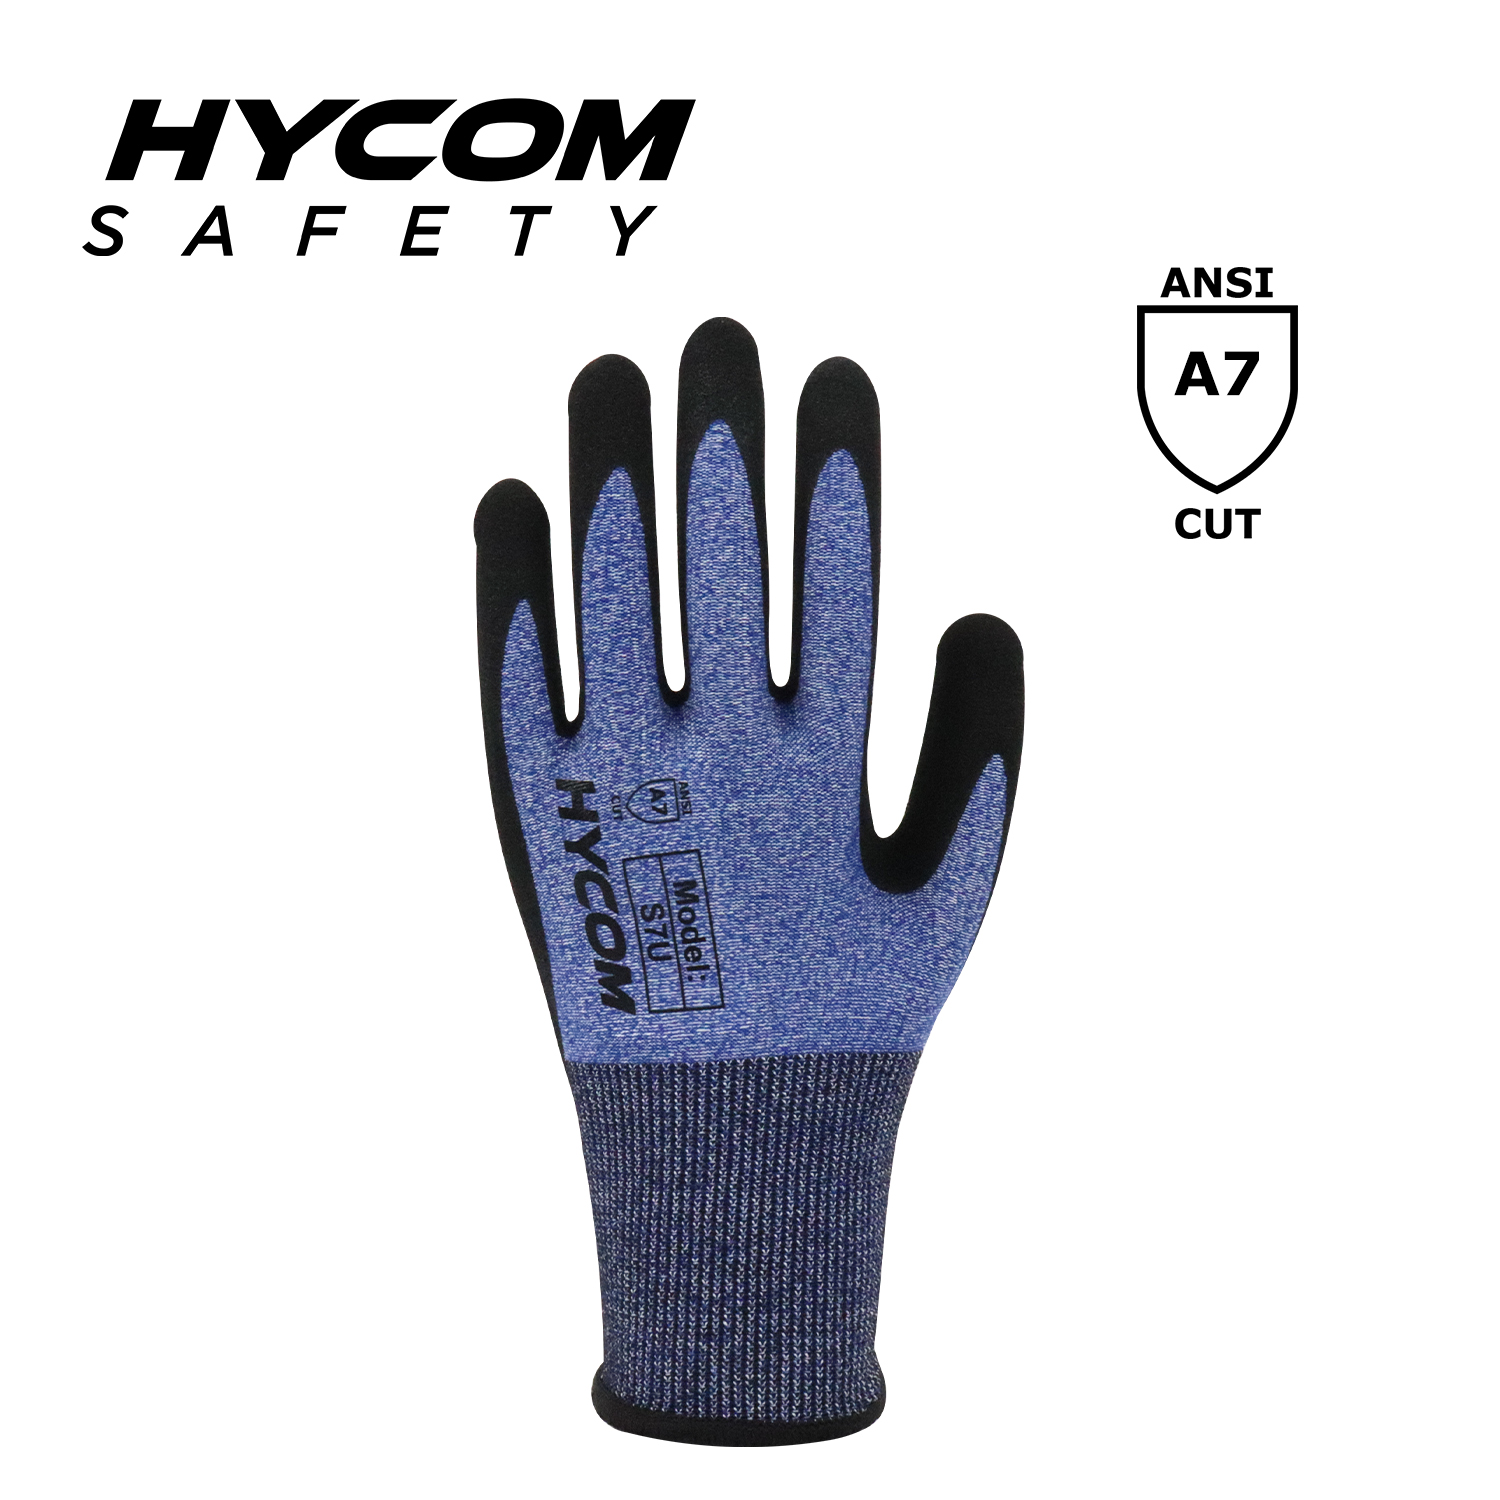 HYCOM 18G ANSI 7 Cut Resistant Glove with Palm Foam Nitrile Coating PPE Gloves